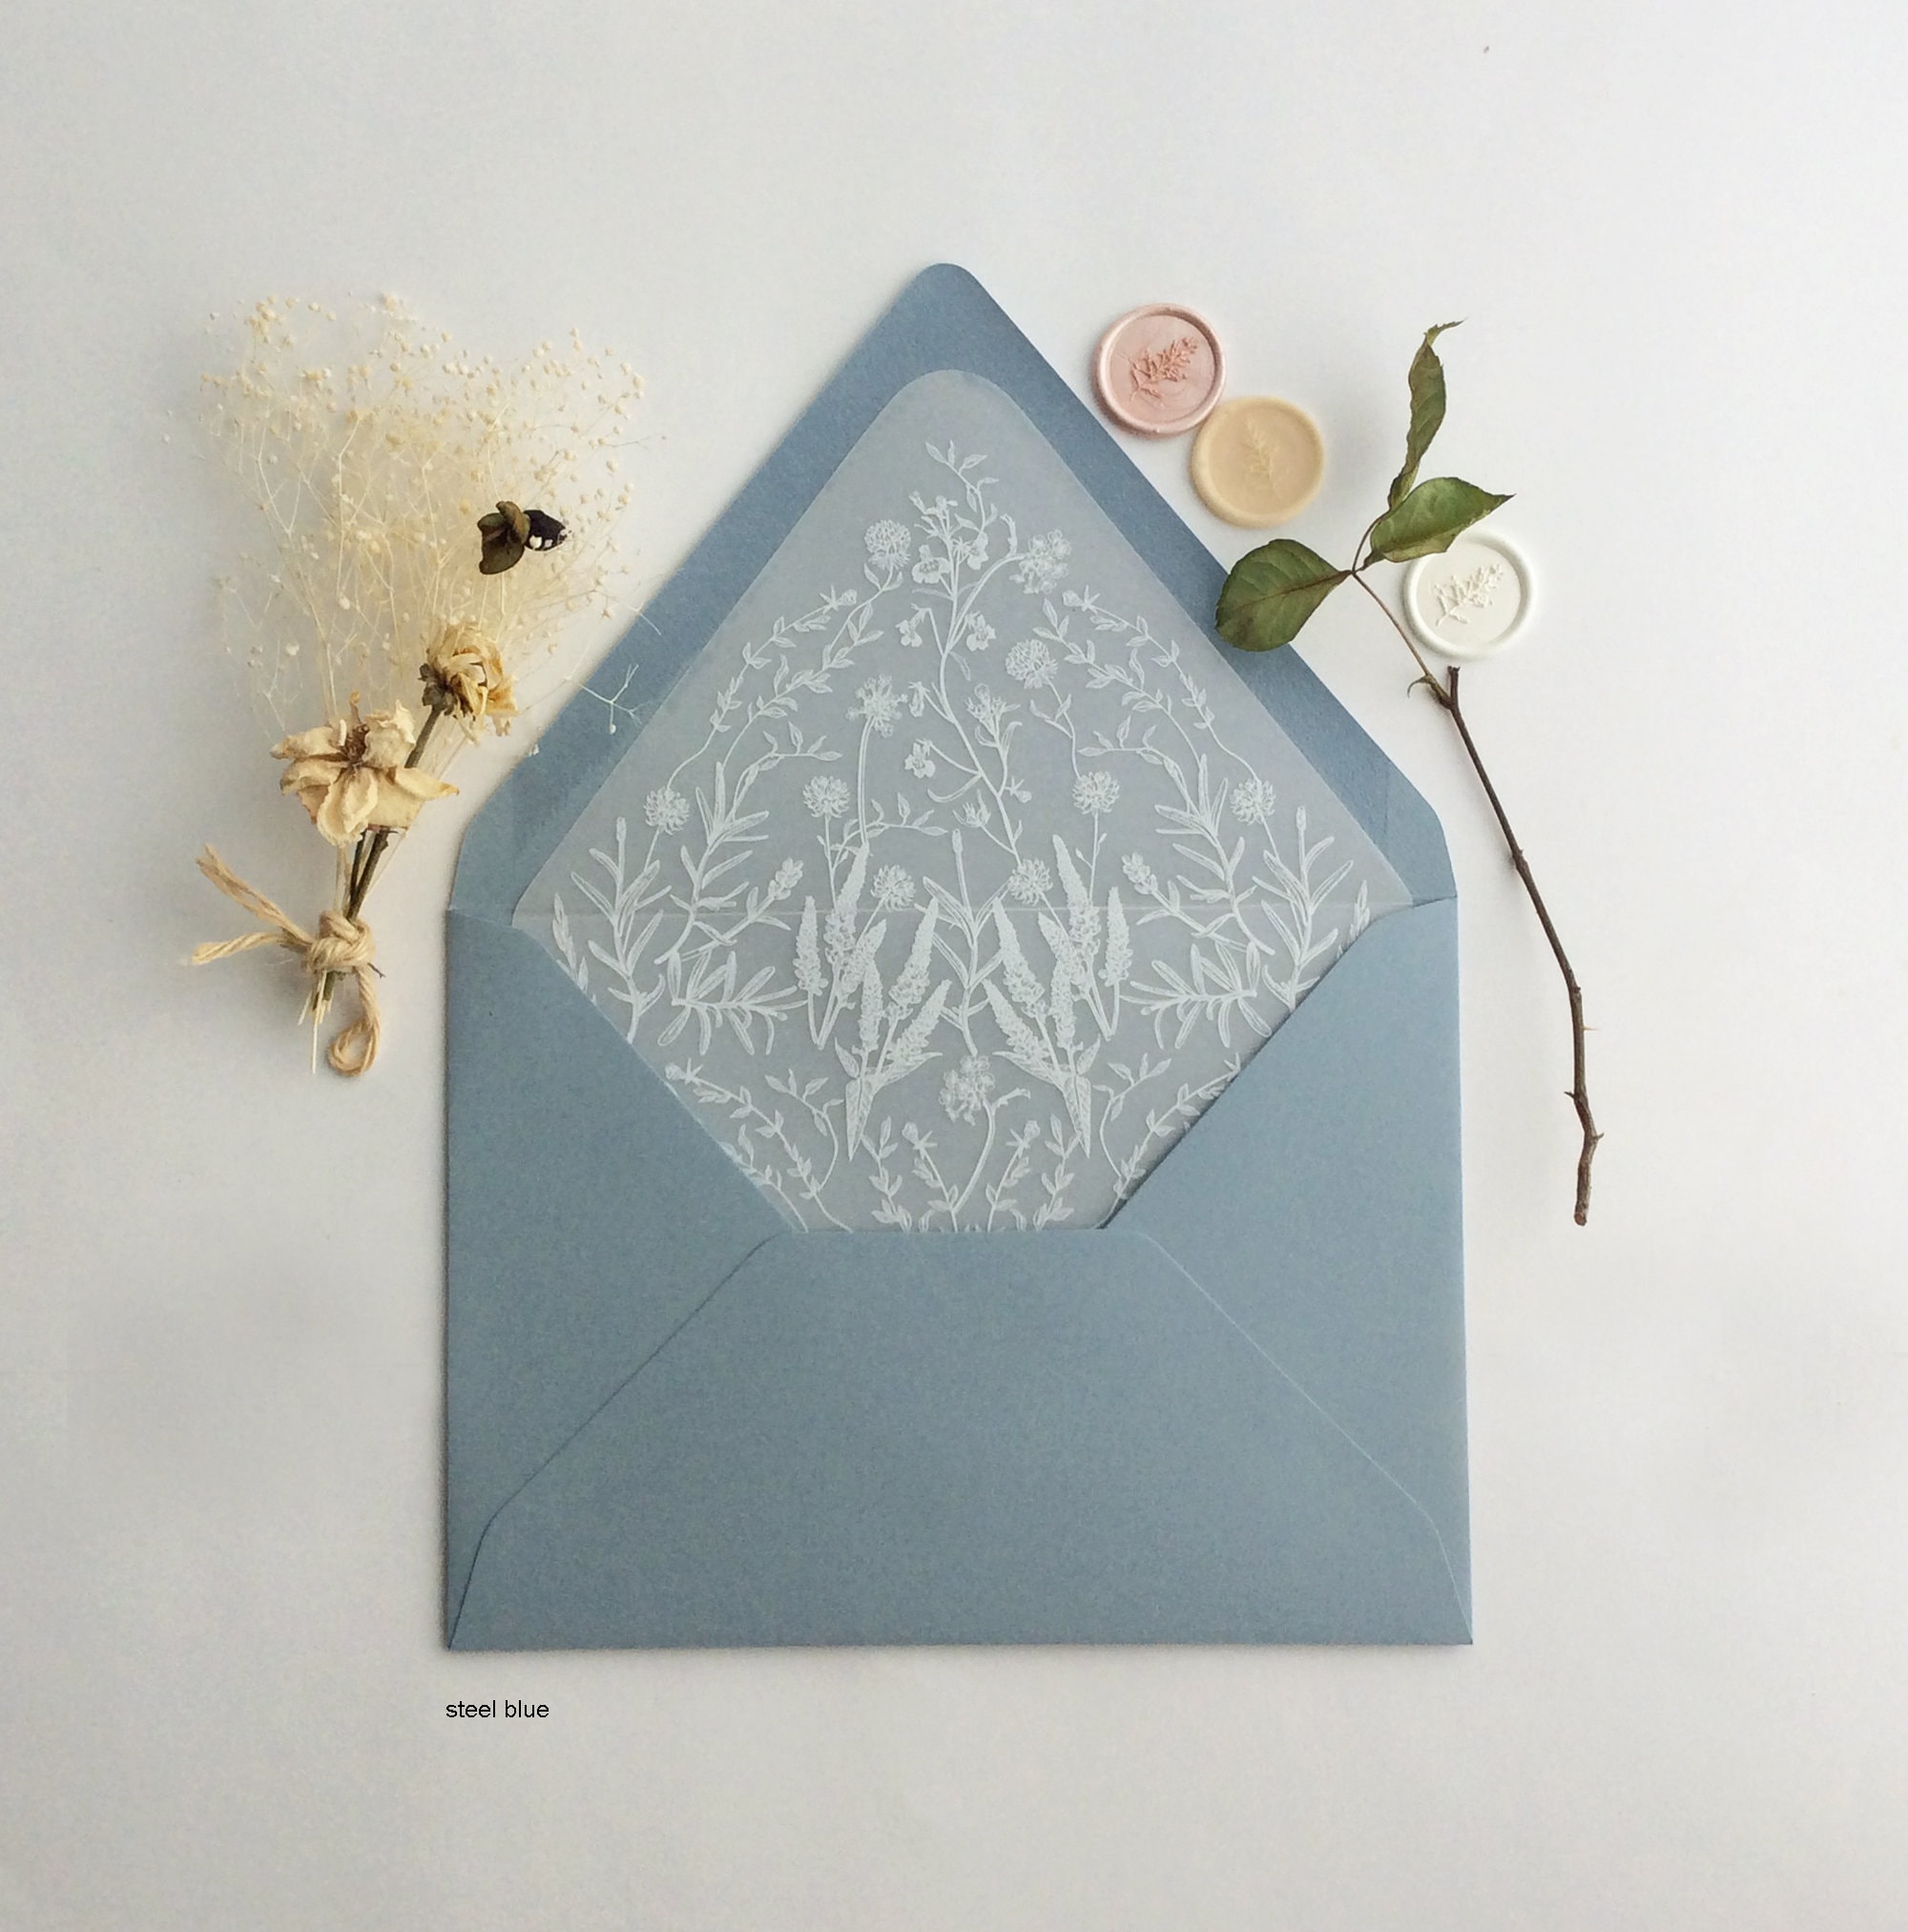 Make a Statement with These Tips on Envelope Printing for Your Wedding -  Tidewater and Tulle